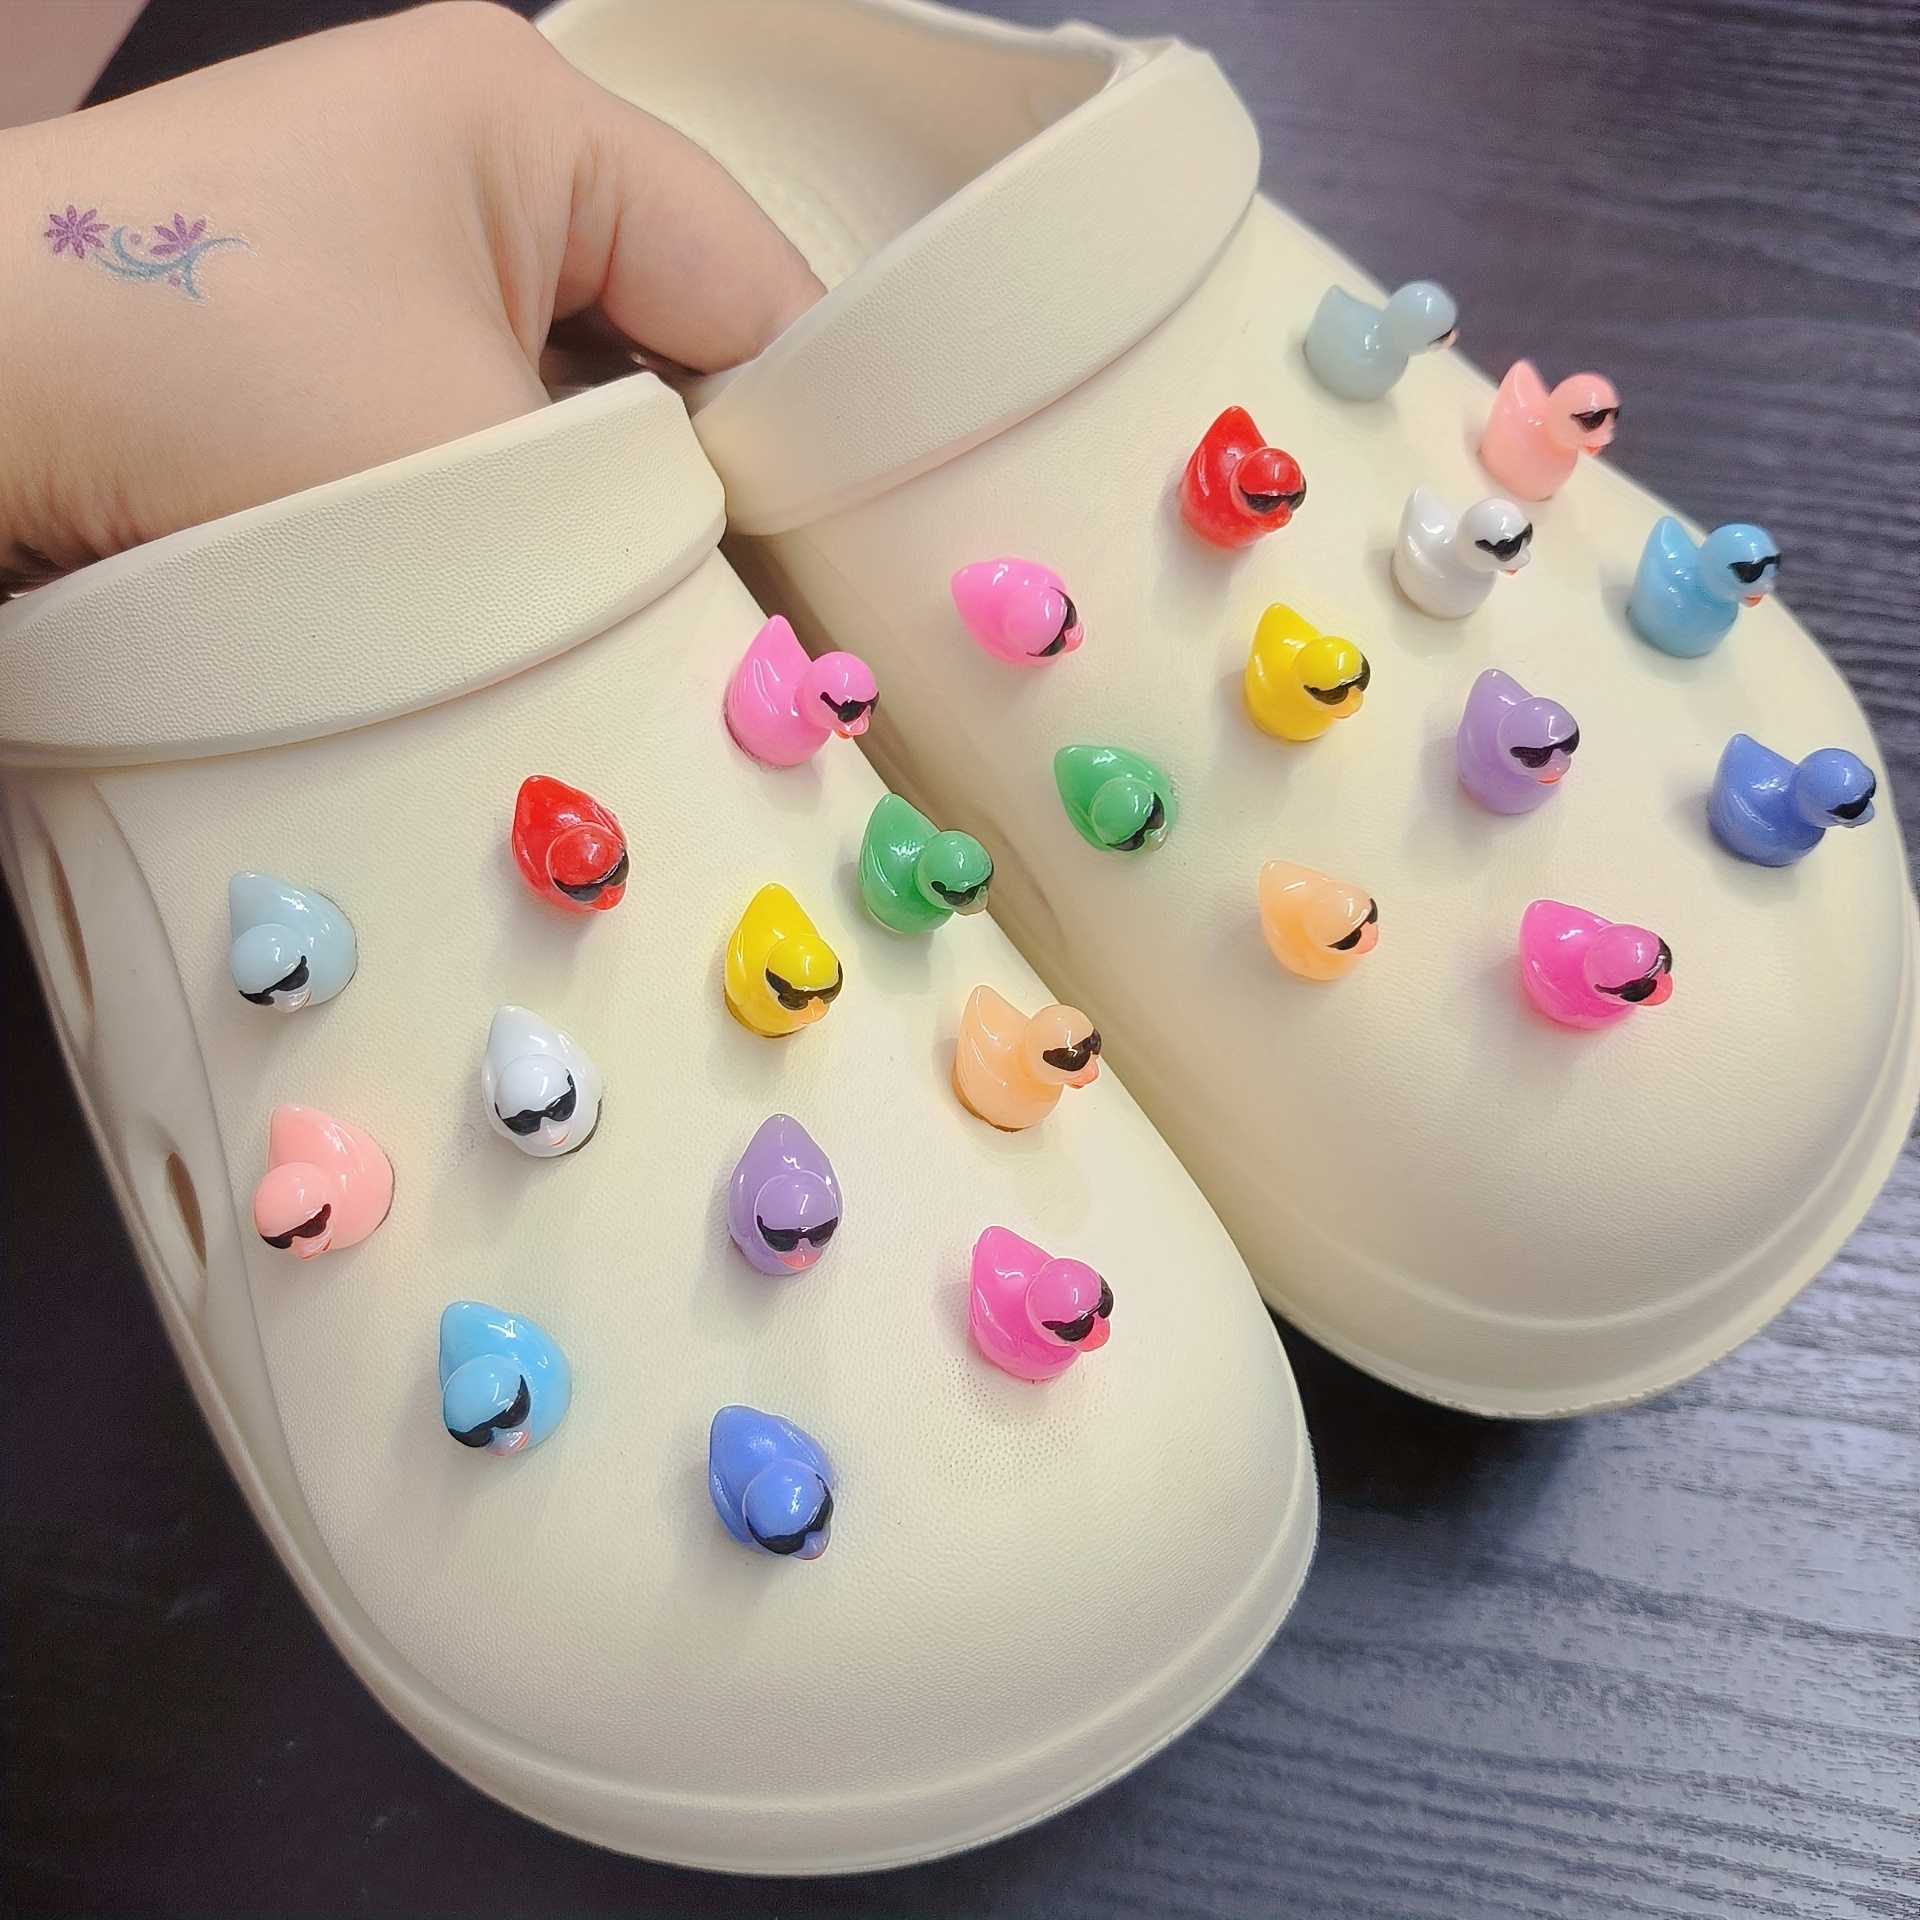 Anime Shoe Charms For Clog Shoes Decoration, Trendy Designer Shoe Charms  Gifts For Kids, Boys, Girls, Shoe Charm For Crocs Clog Pins Accessoris For